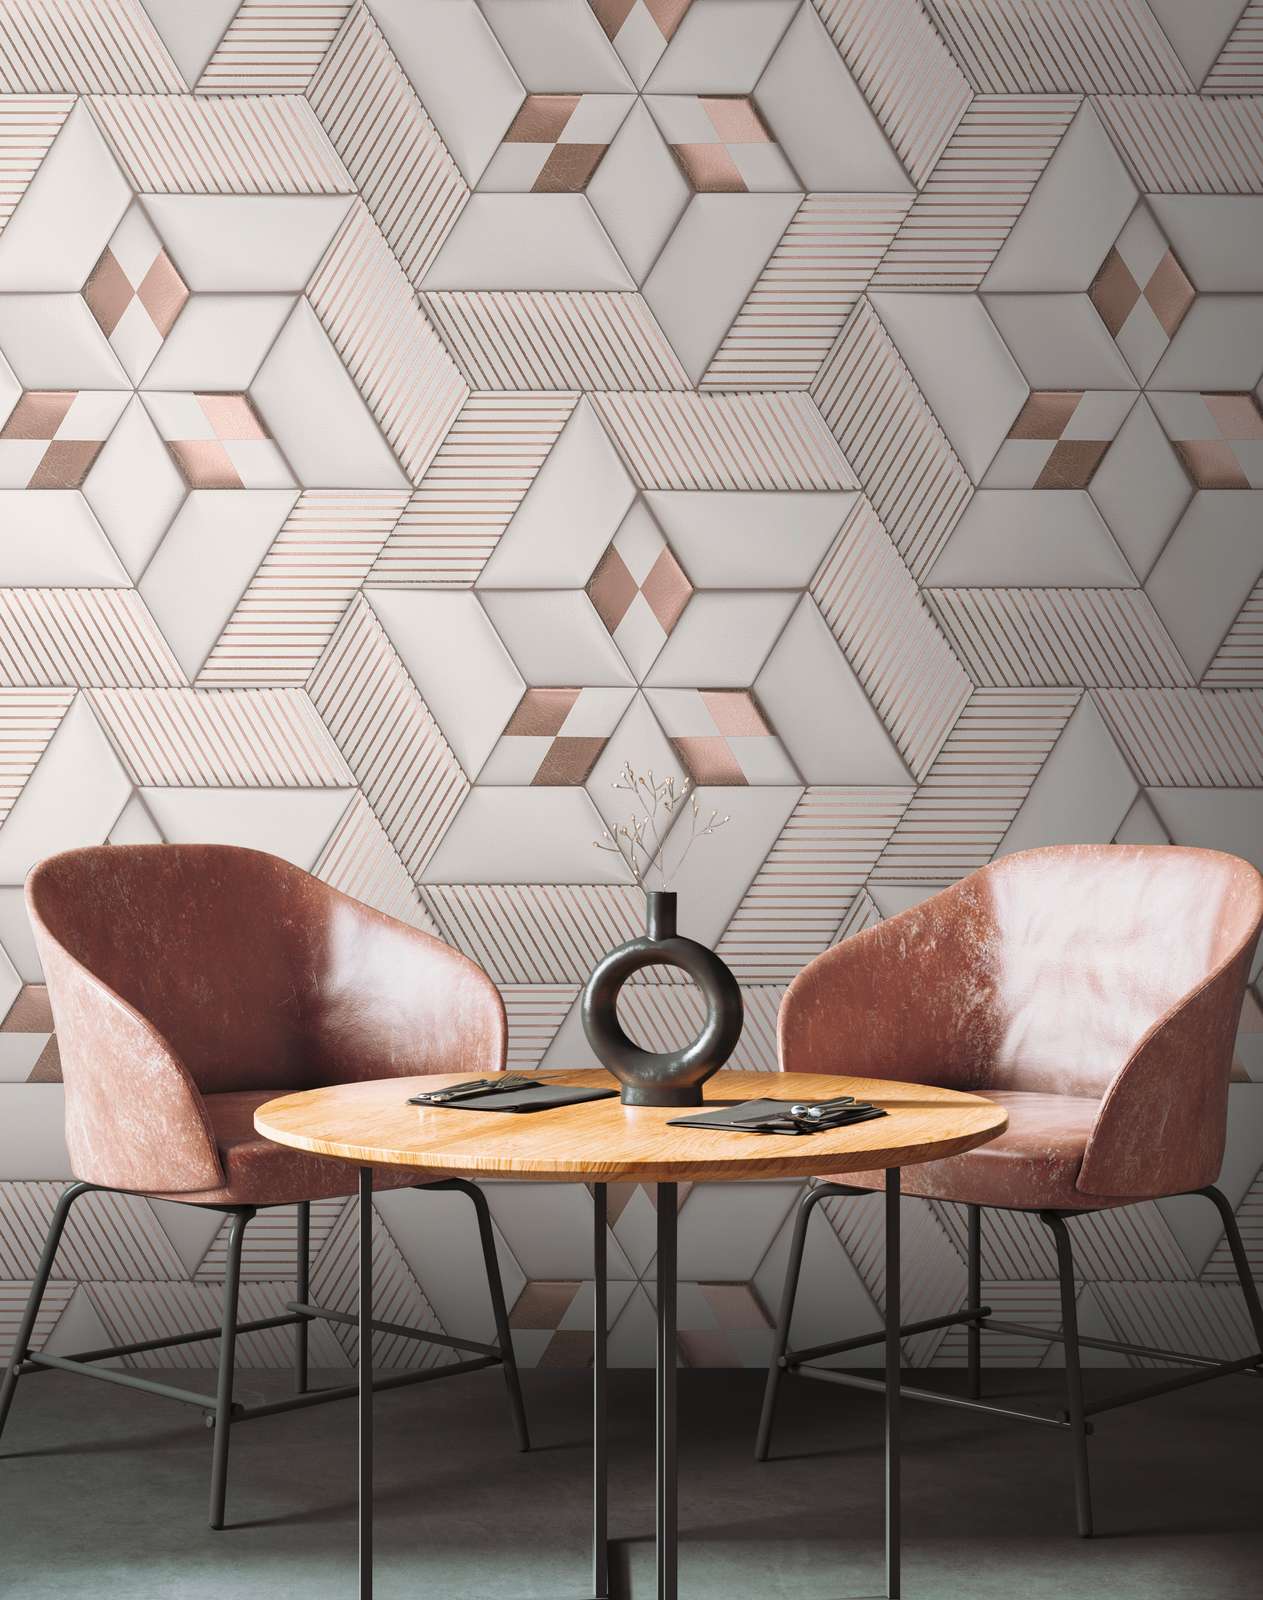             Non-woven wallpaper with abstract 3D pattern - white, cream, bronze
        